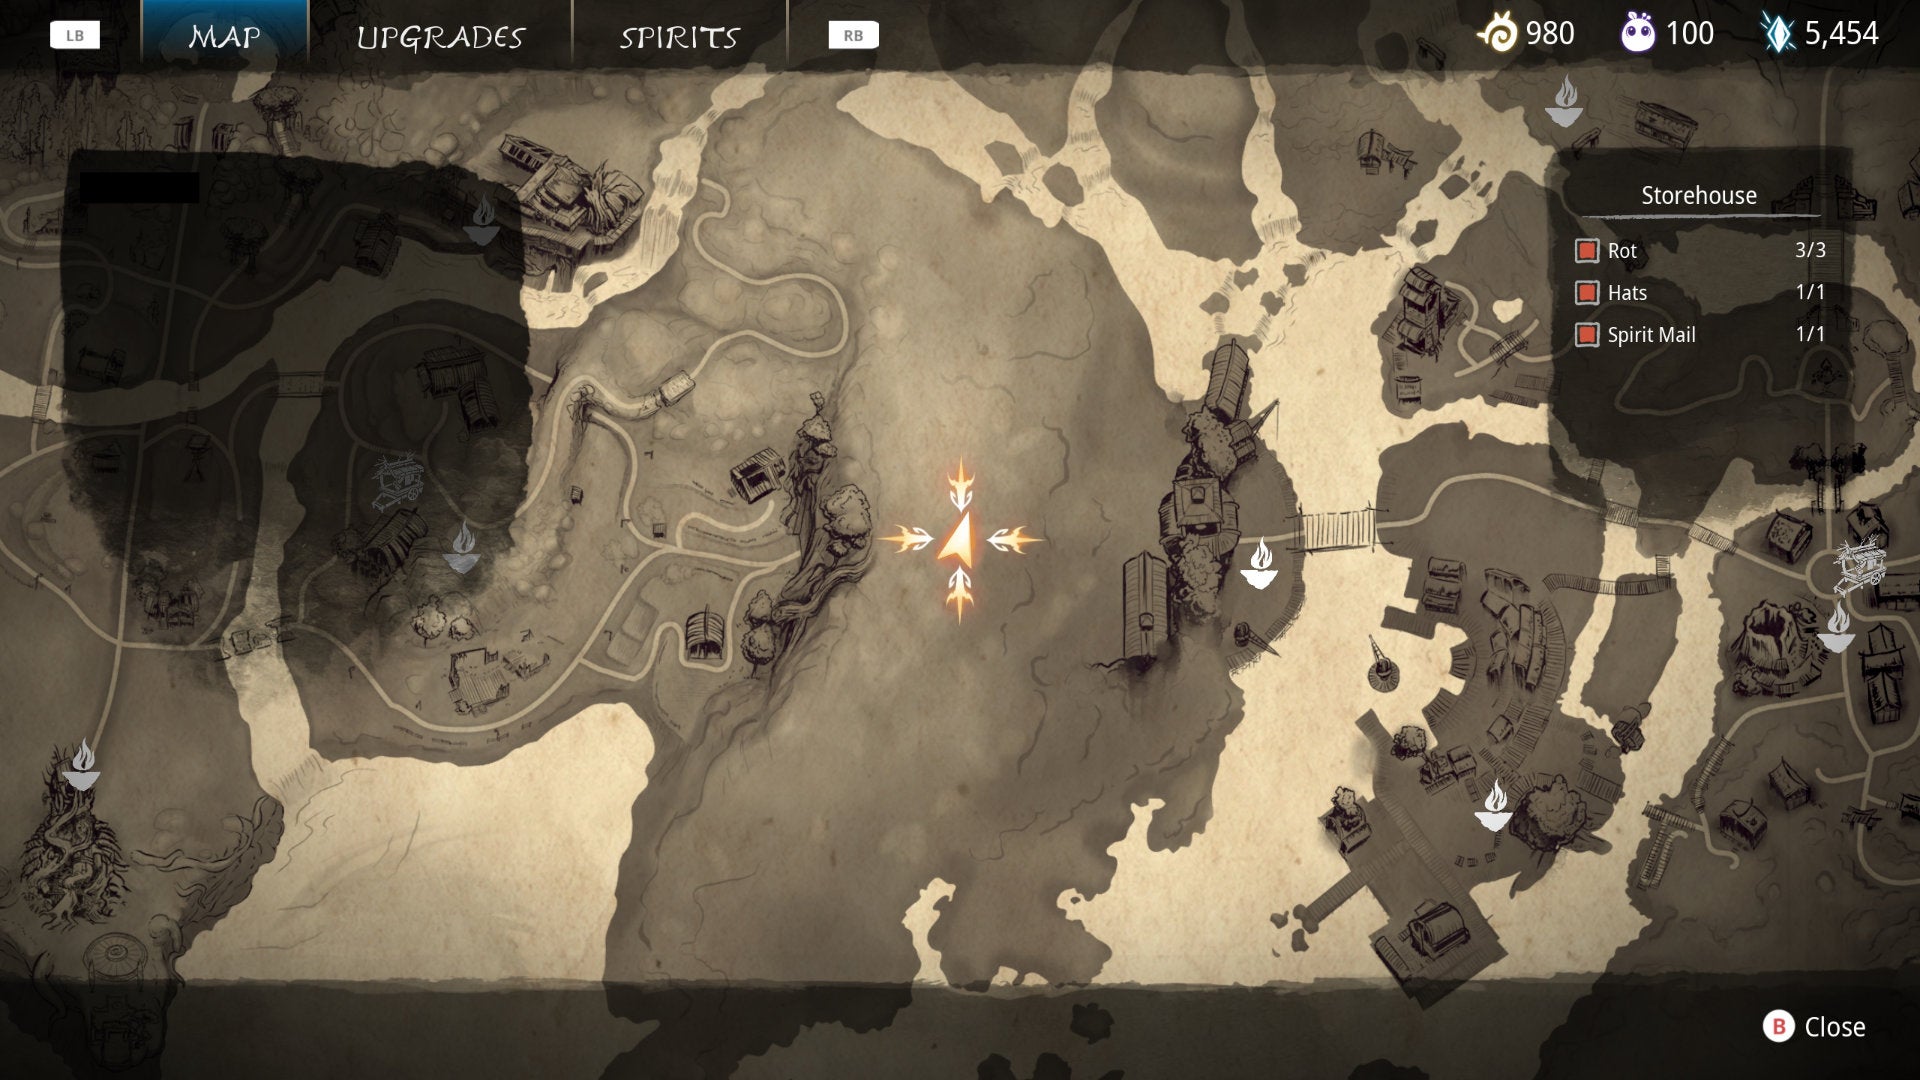 Part of the map of Kena: Bridge Of Spirits where a Spirit Mail collectible is hidden nearby.